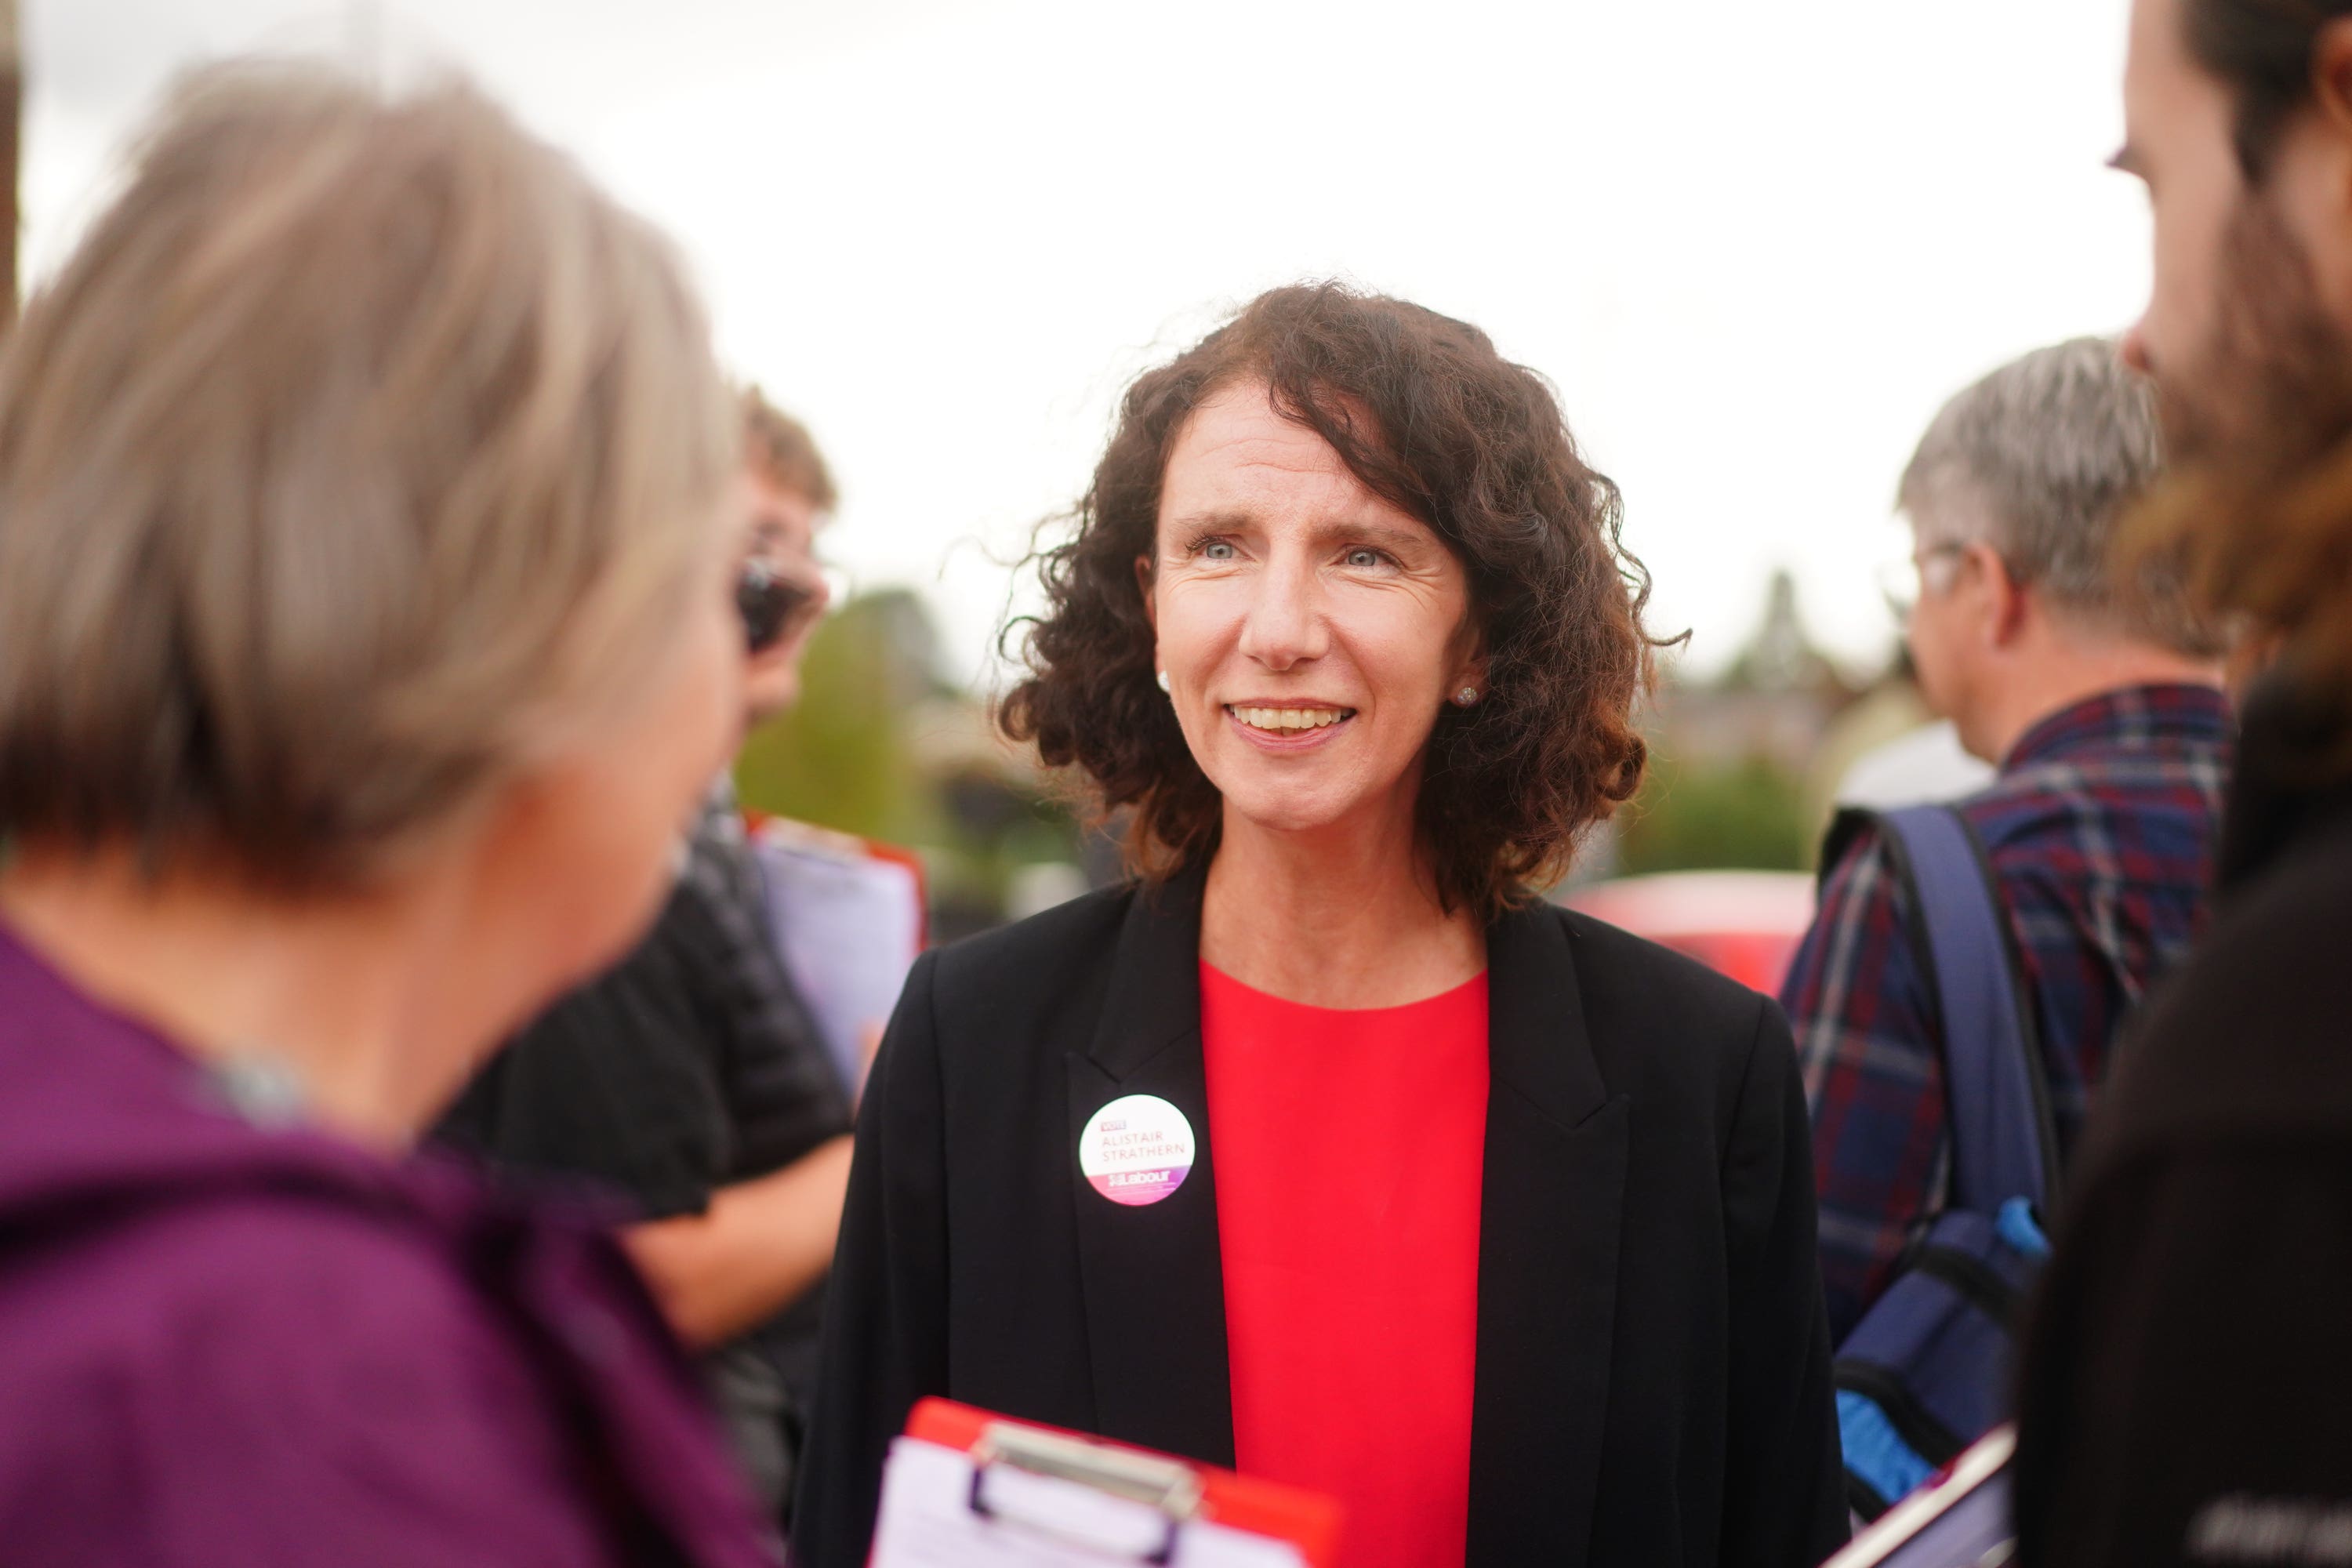 Anneliese Dodds said she wanted to see the process for gender recognition modernised